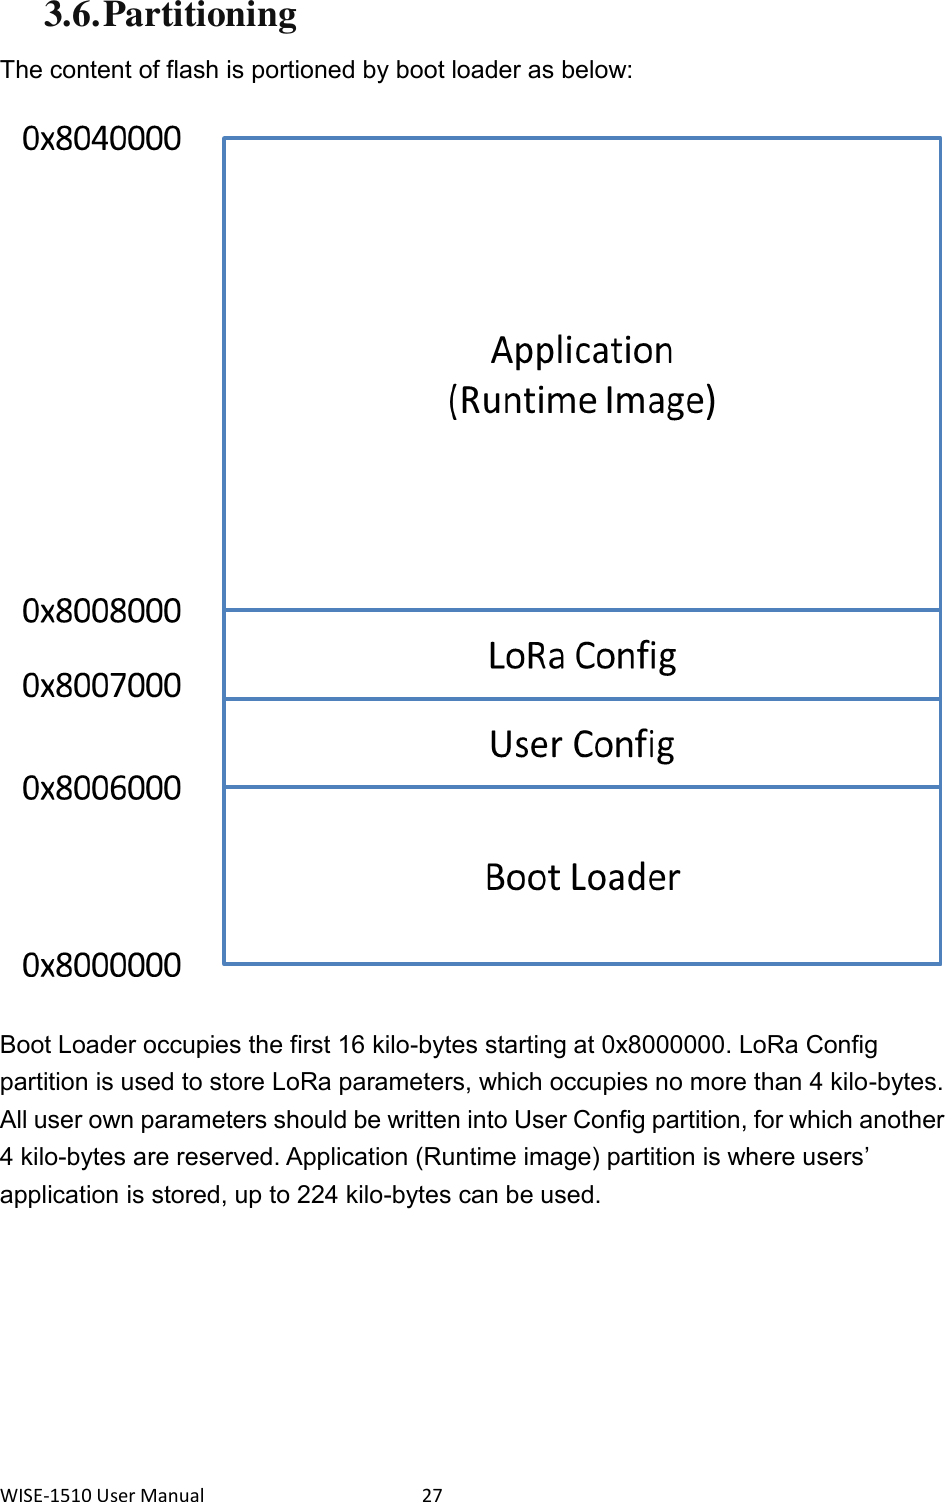 WISE-1510 User Manual  27 3.6. Partitioning The content of flash is portioned by boot loader as below: Boot Loader occupies the first 16 kilo-bytes starting at 0x8000000. LoRa Config partition is used to store LoRa parameters, which occupies no more than 4 kilo-bytes. All user own parameters should be written into User Config partition, for which another 4 kilo-bytes are reserved. Application (Runtime image) partition is where users’ application is stored, up to 224 kilo-bytes can be used.    